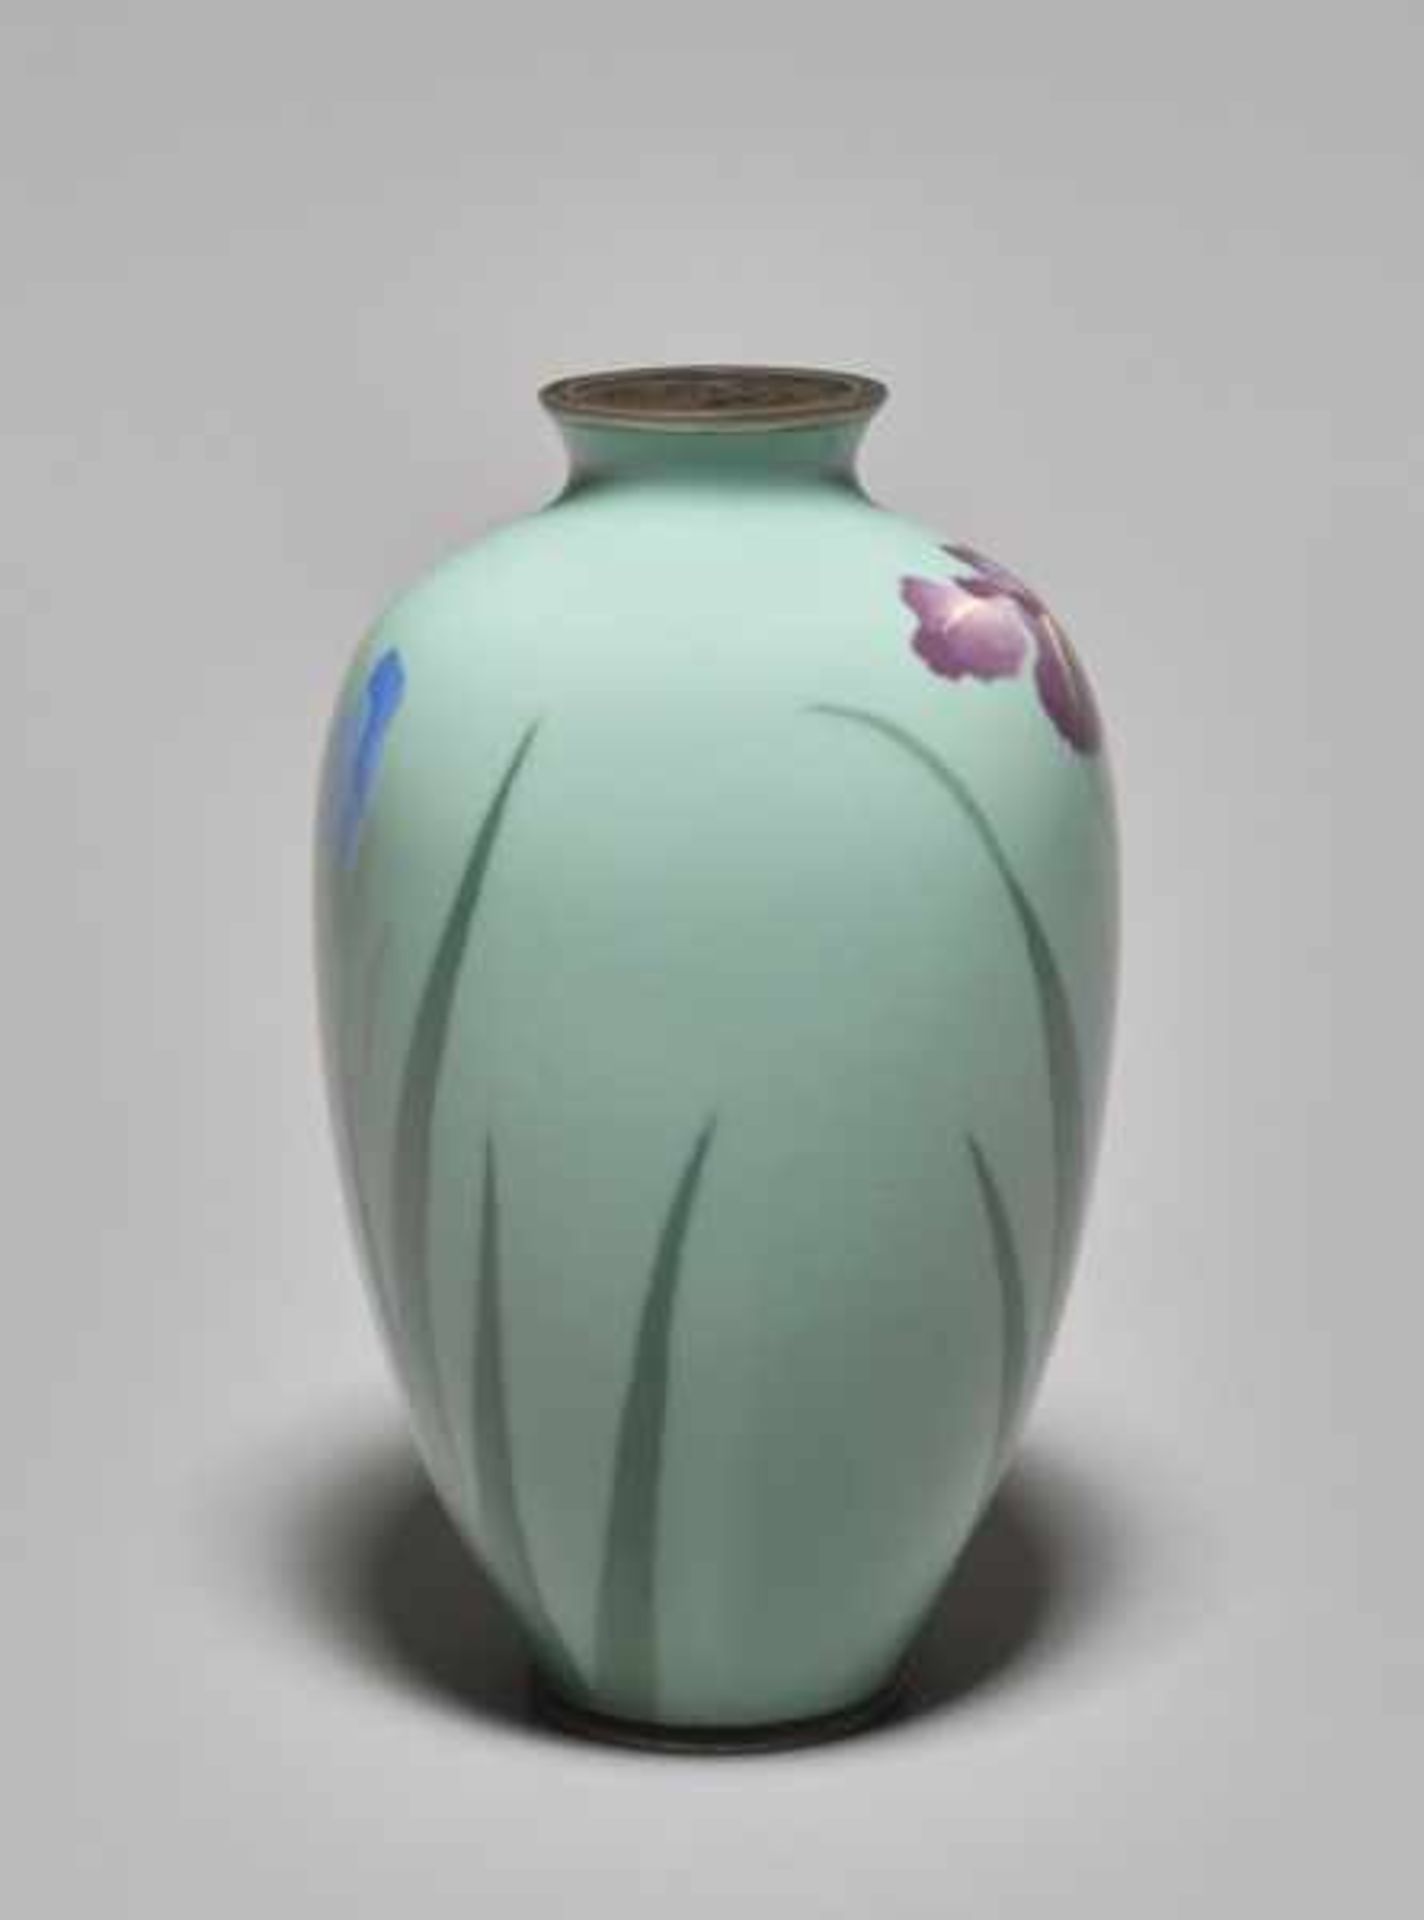 A CLOISONNÉ VASE WITH IRIS BLOSSOMS IN THE STYLE OF NAMIKAWA SOSUKE Colored enamel cloisonné on - Image 4 of 6